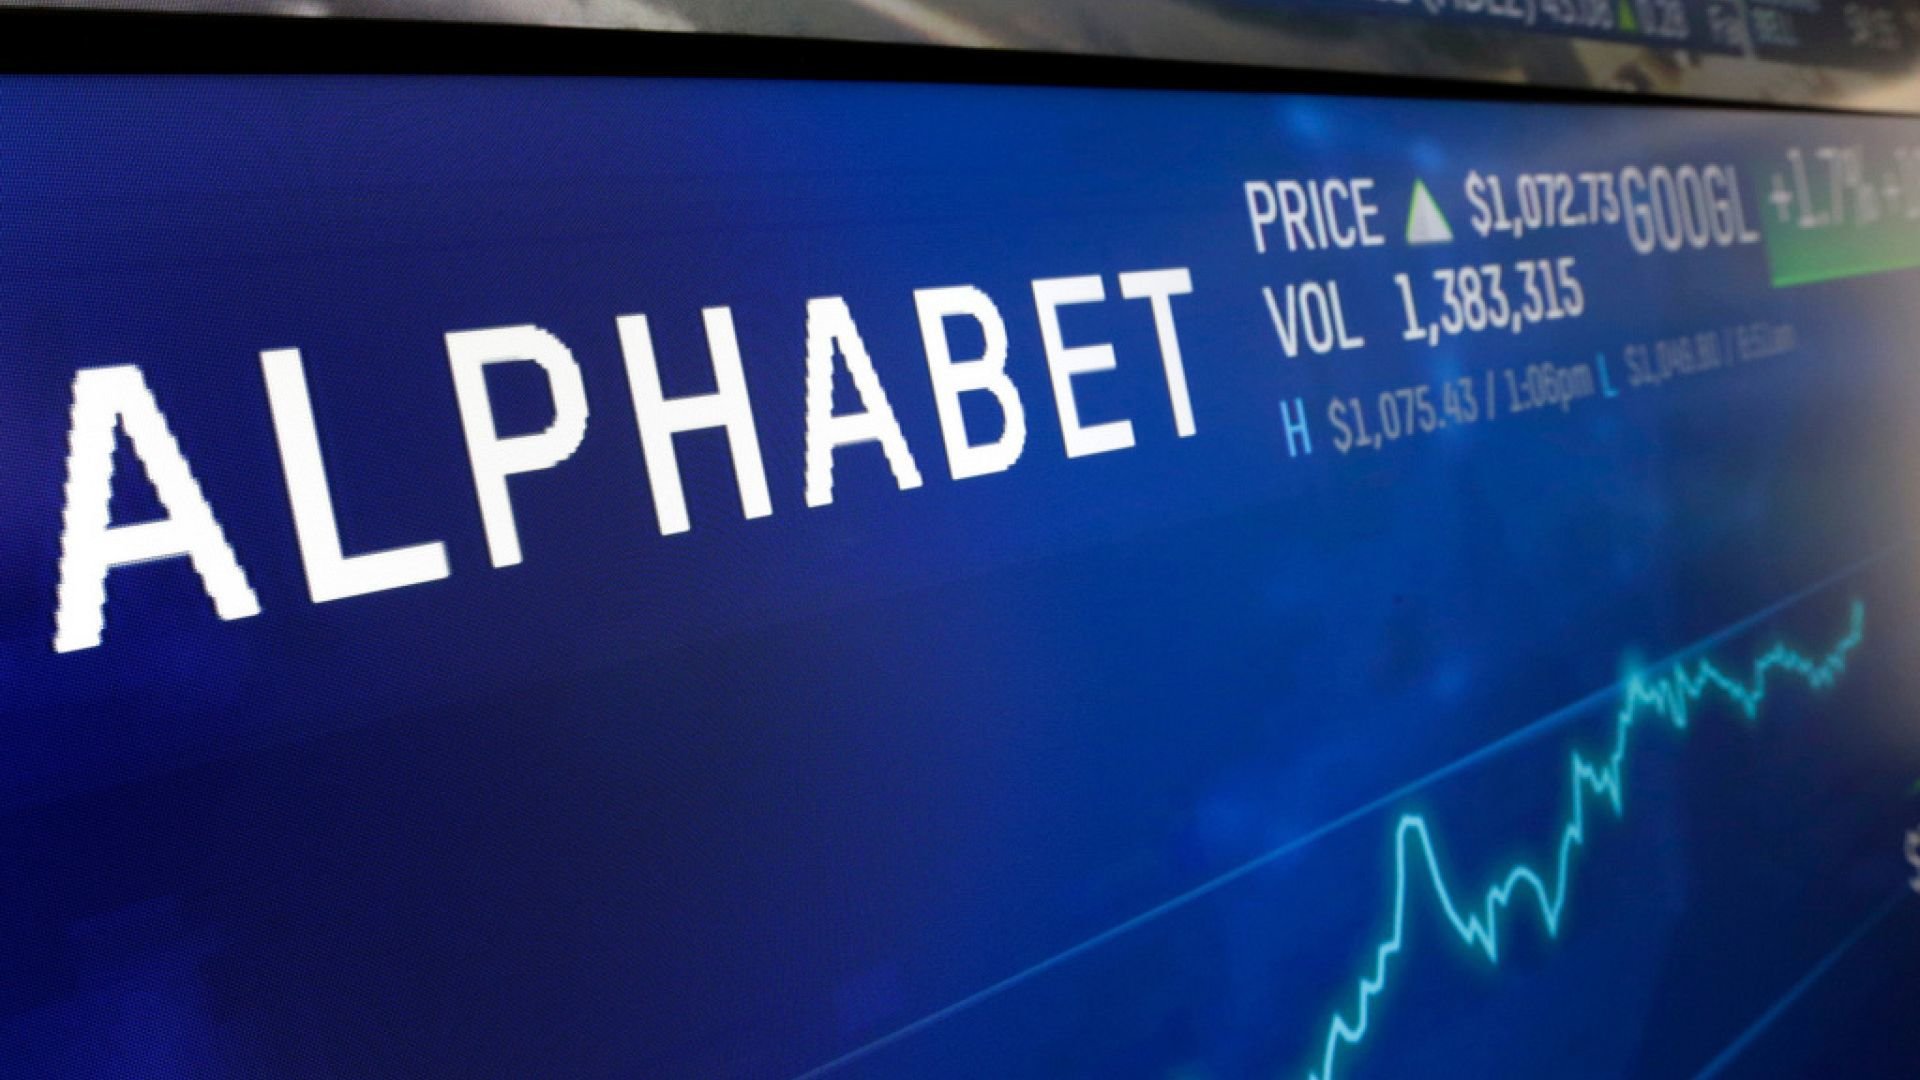 Alphabet and Microsoft Surpass Earnings Expectations, Fueled by AI-Driven Growth in Advertising and Cloud Services